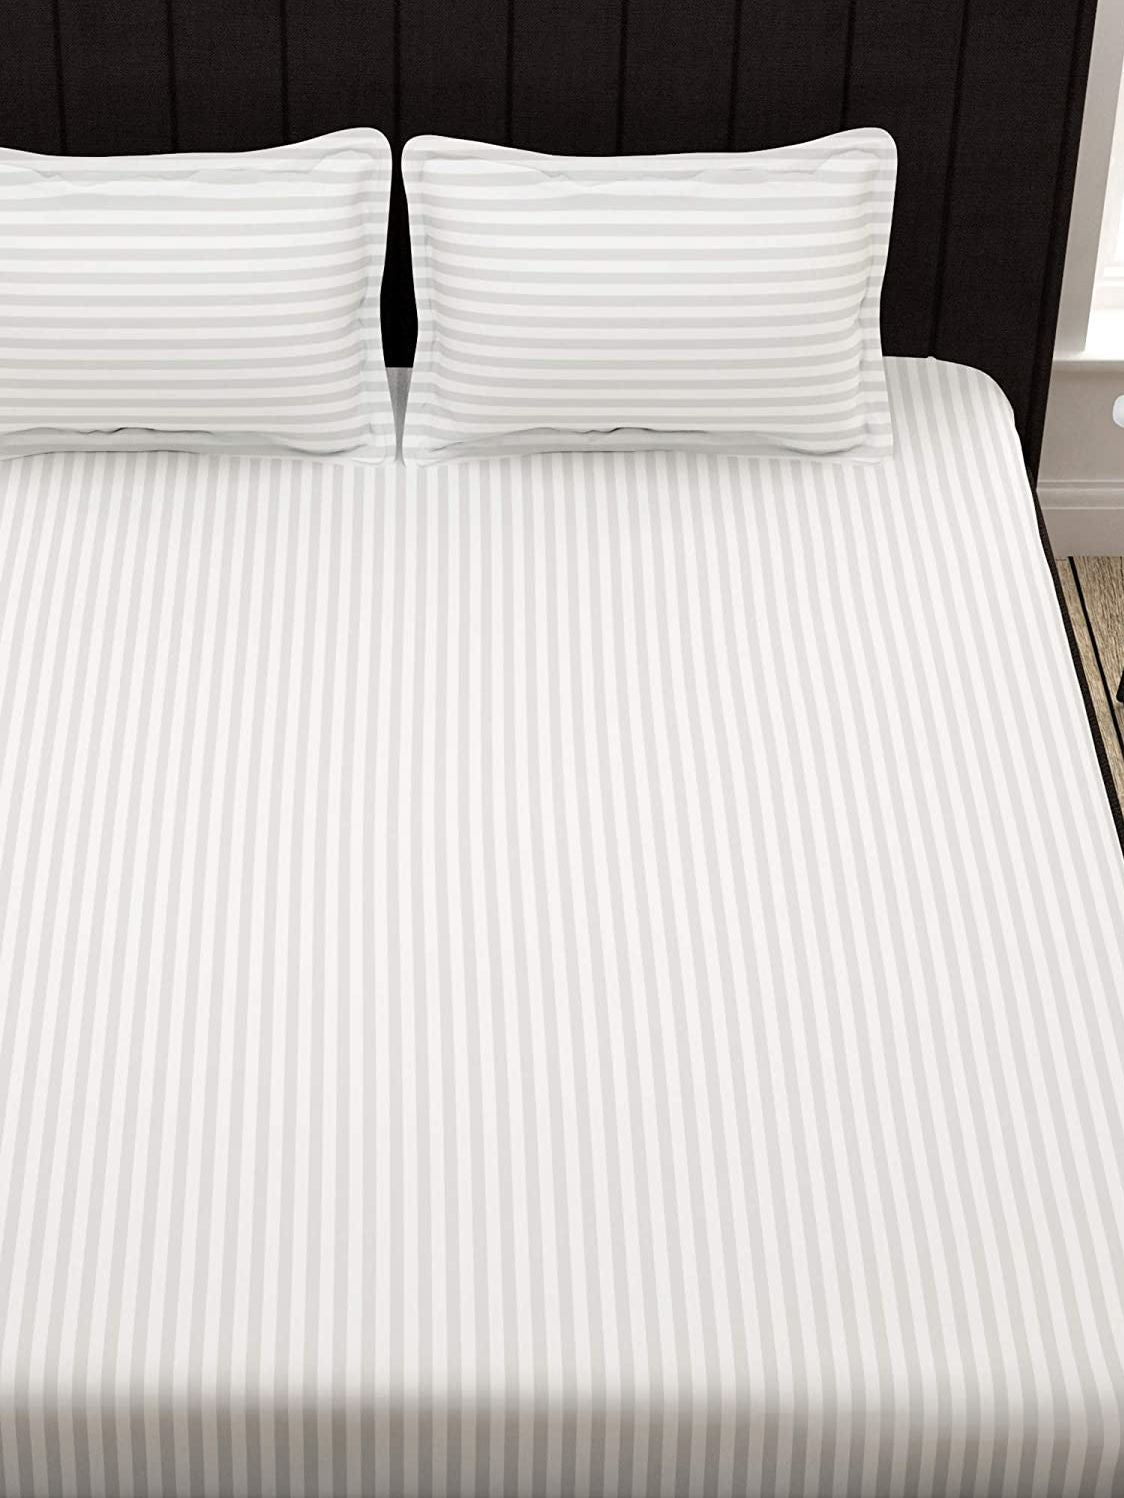 EVER HOME Cotton Satin Striped Plain Bedsheet for Double Bed